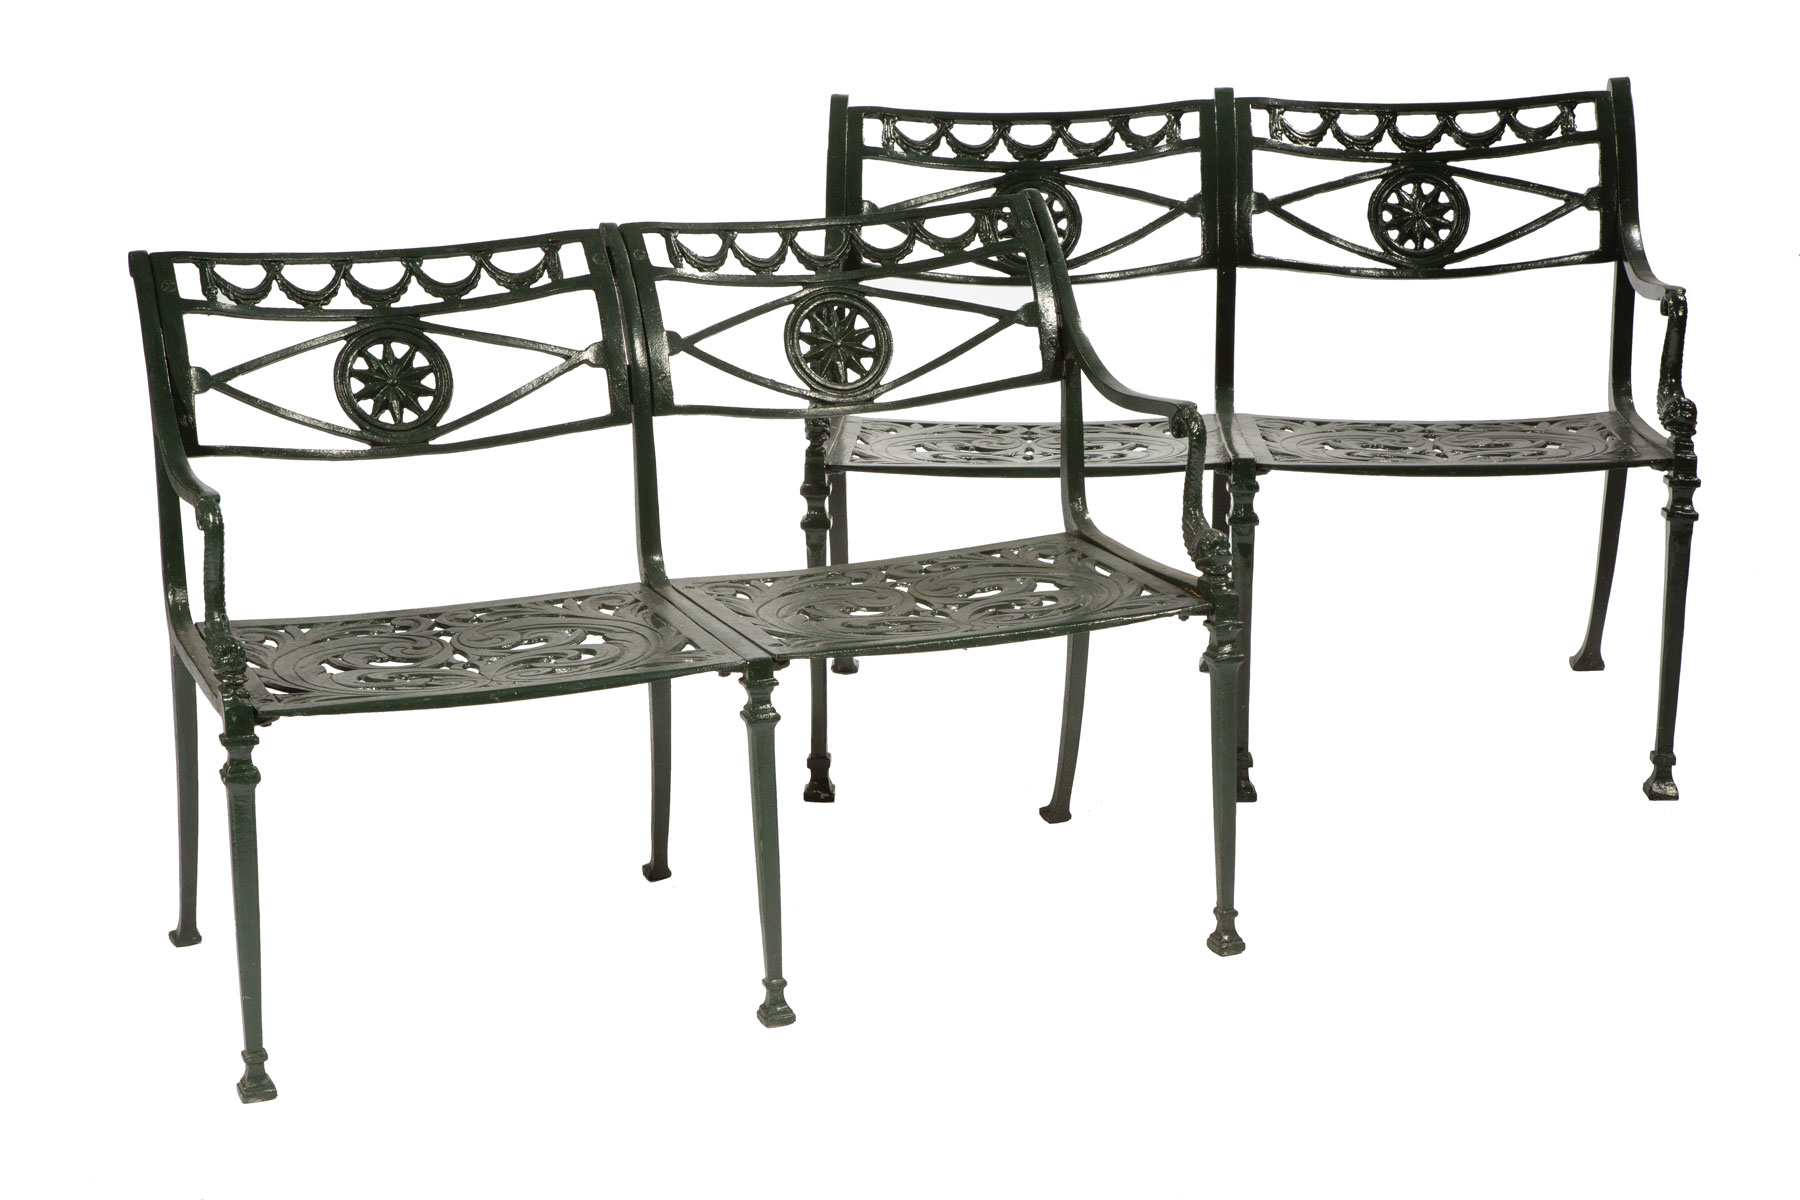 Pair of Vintage Patinated Metal Garden Benches , "Star & Dolphin" pattern, scrolled swagged back,